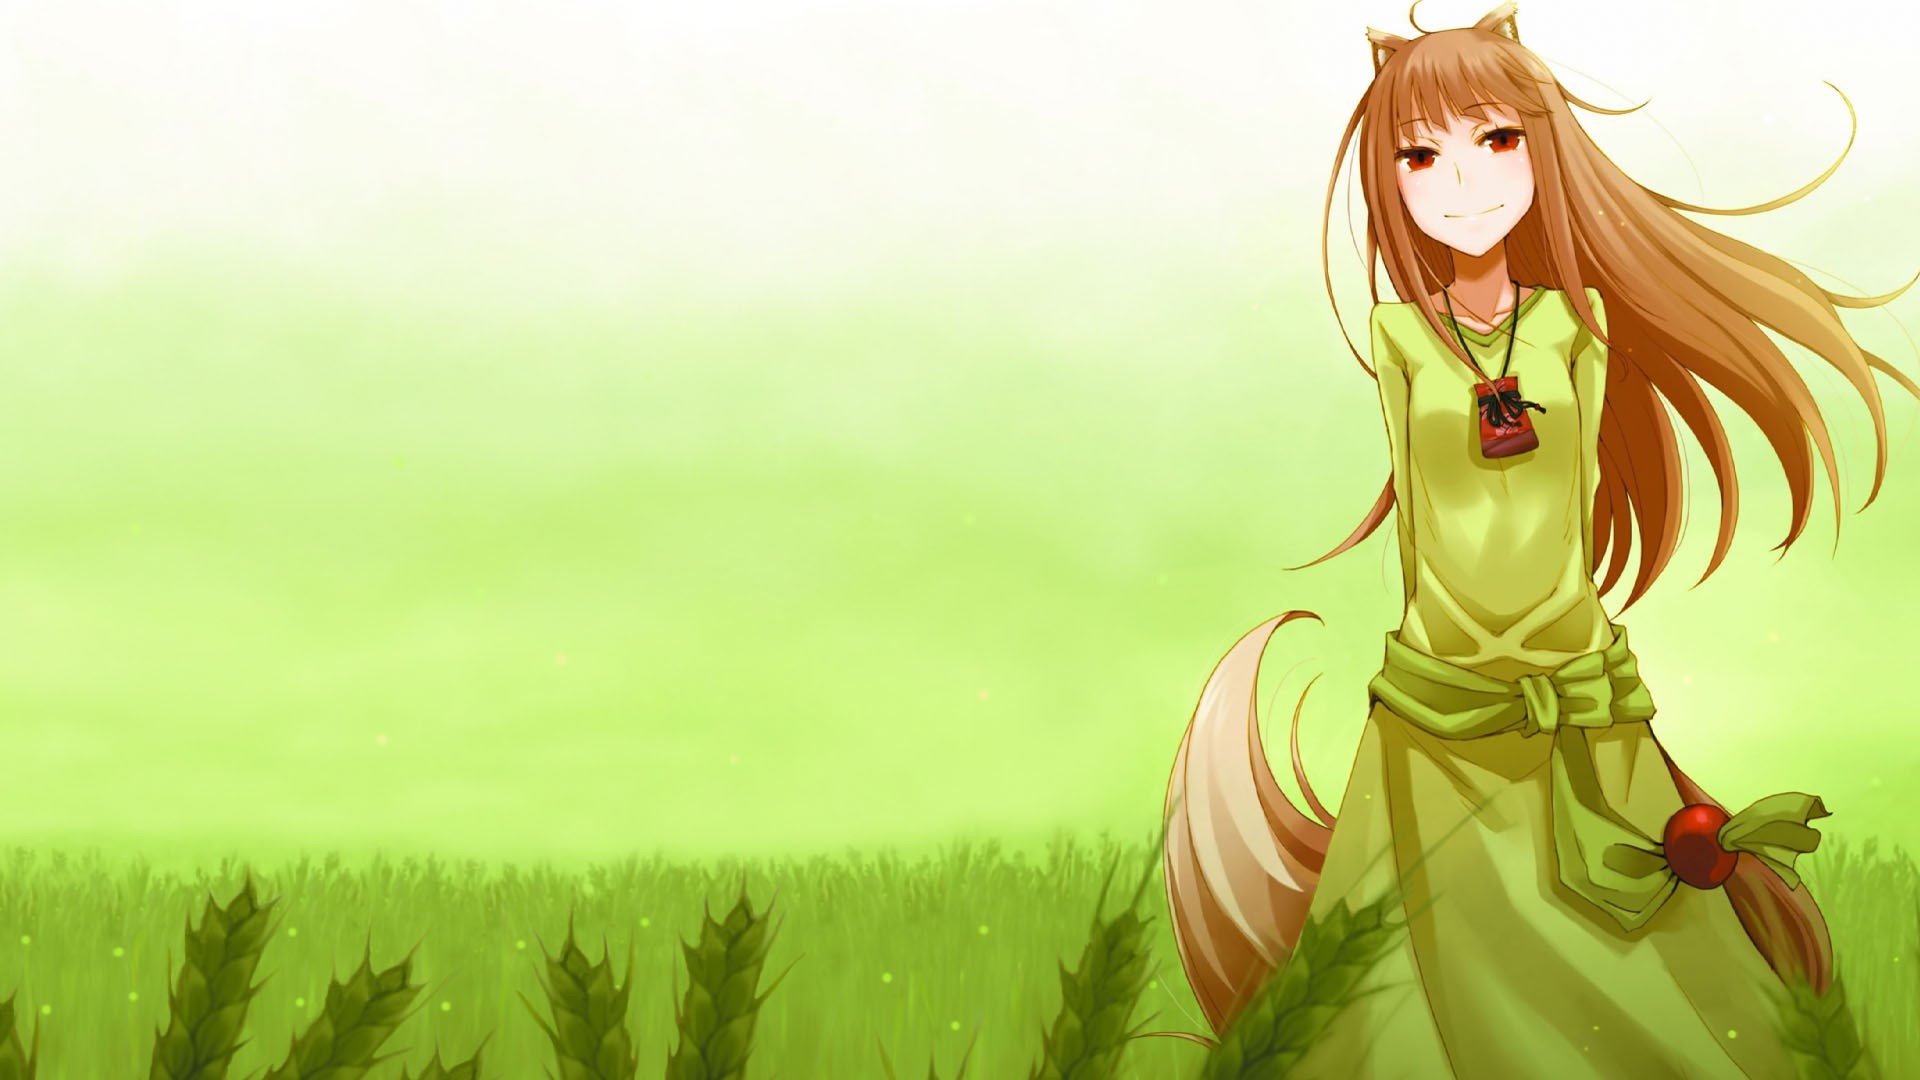 anime girls, Anime, Green, Grass, Spice and Wolf Wallpaper